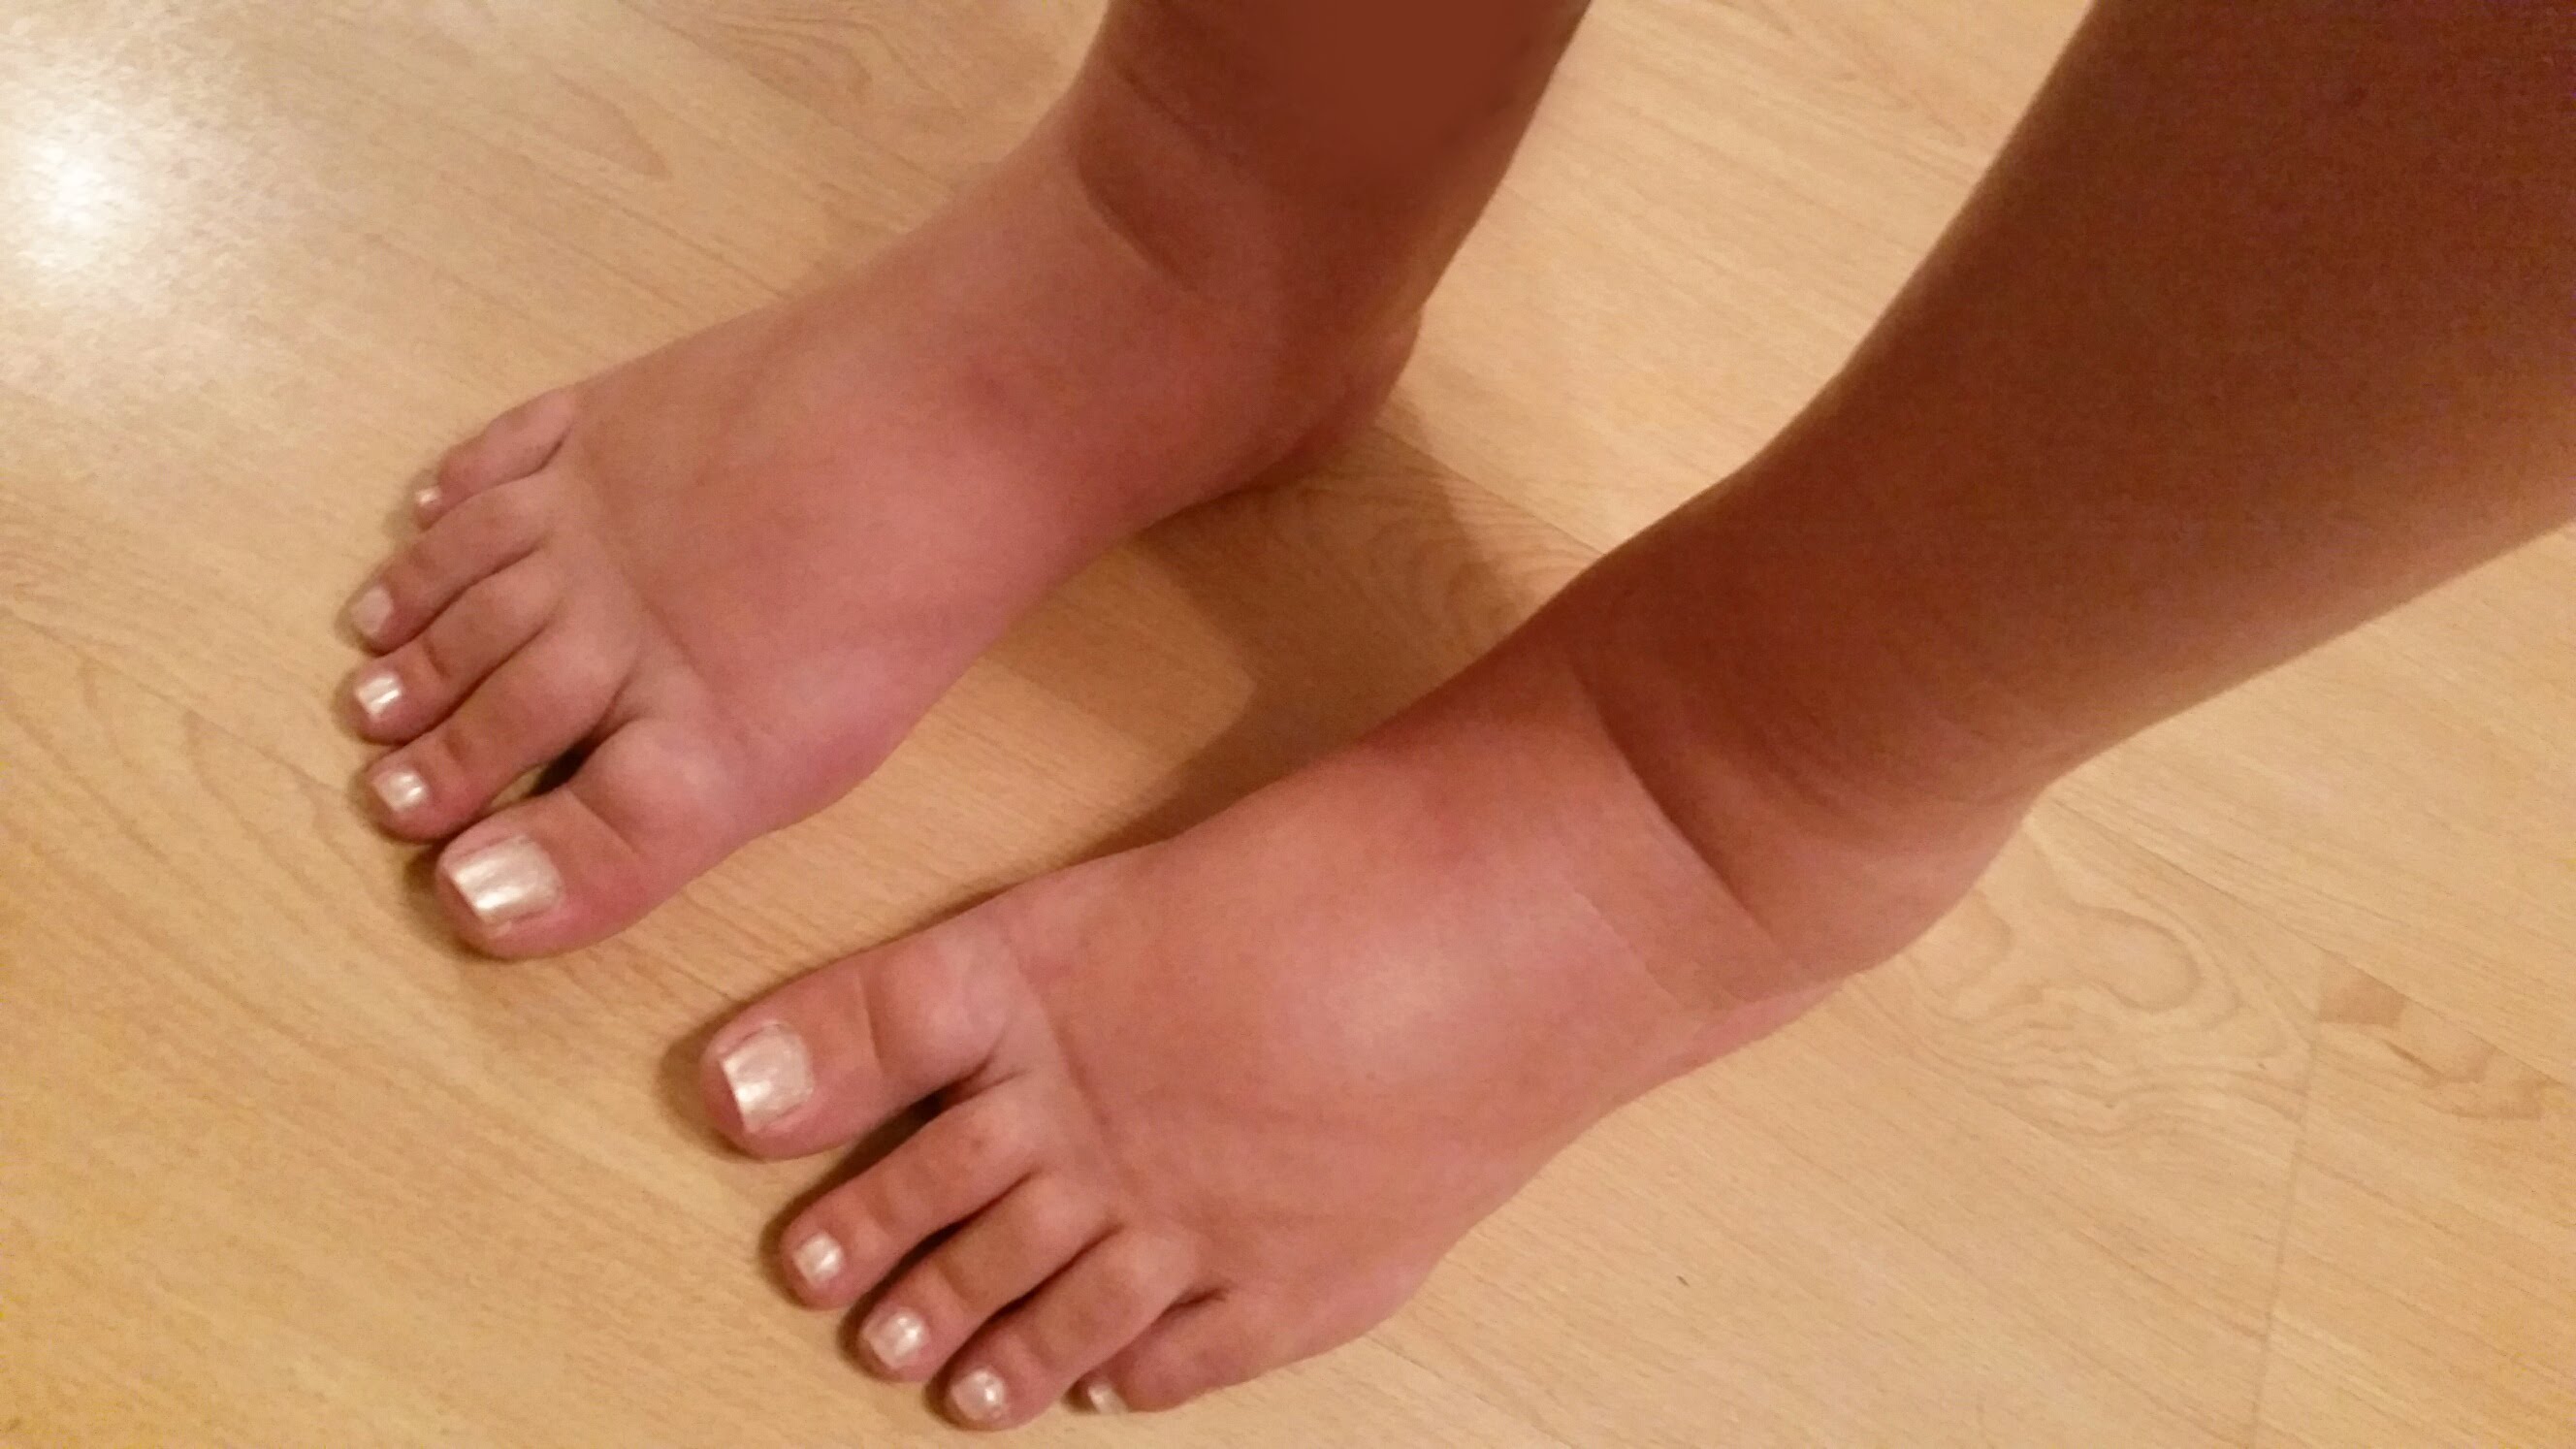 Swelling In Feet And Lower Legs 119